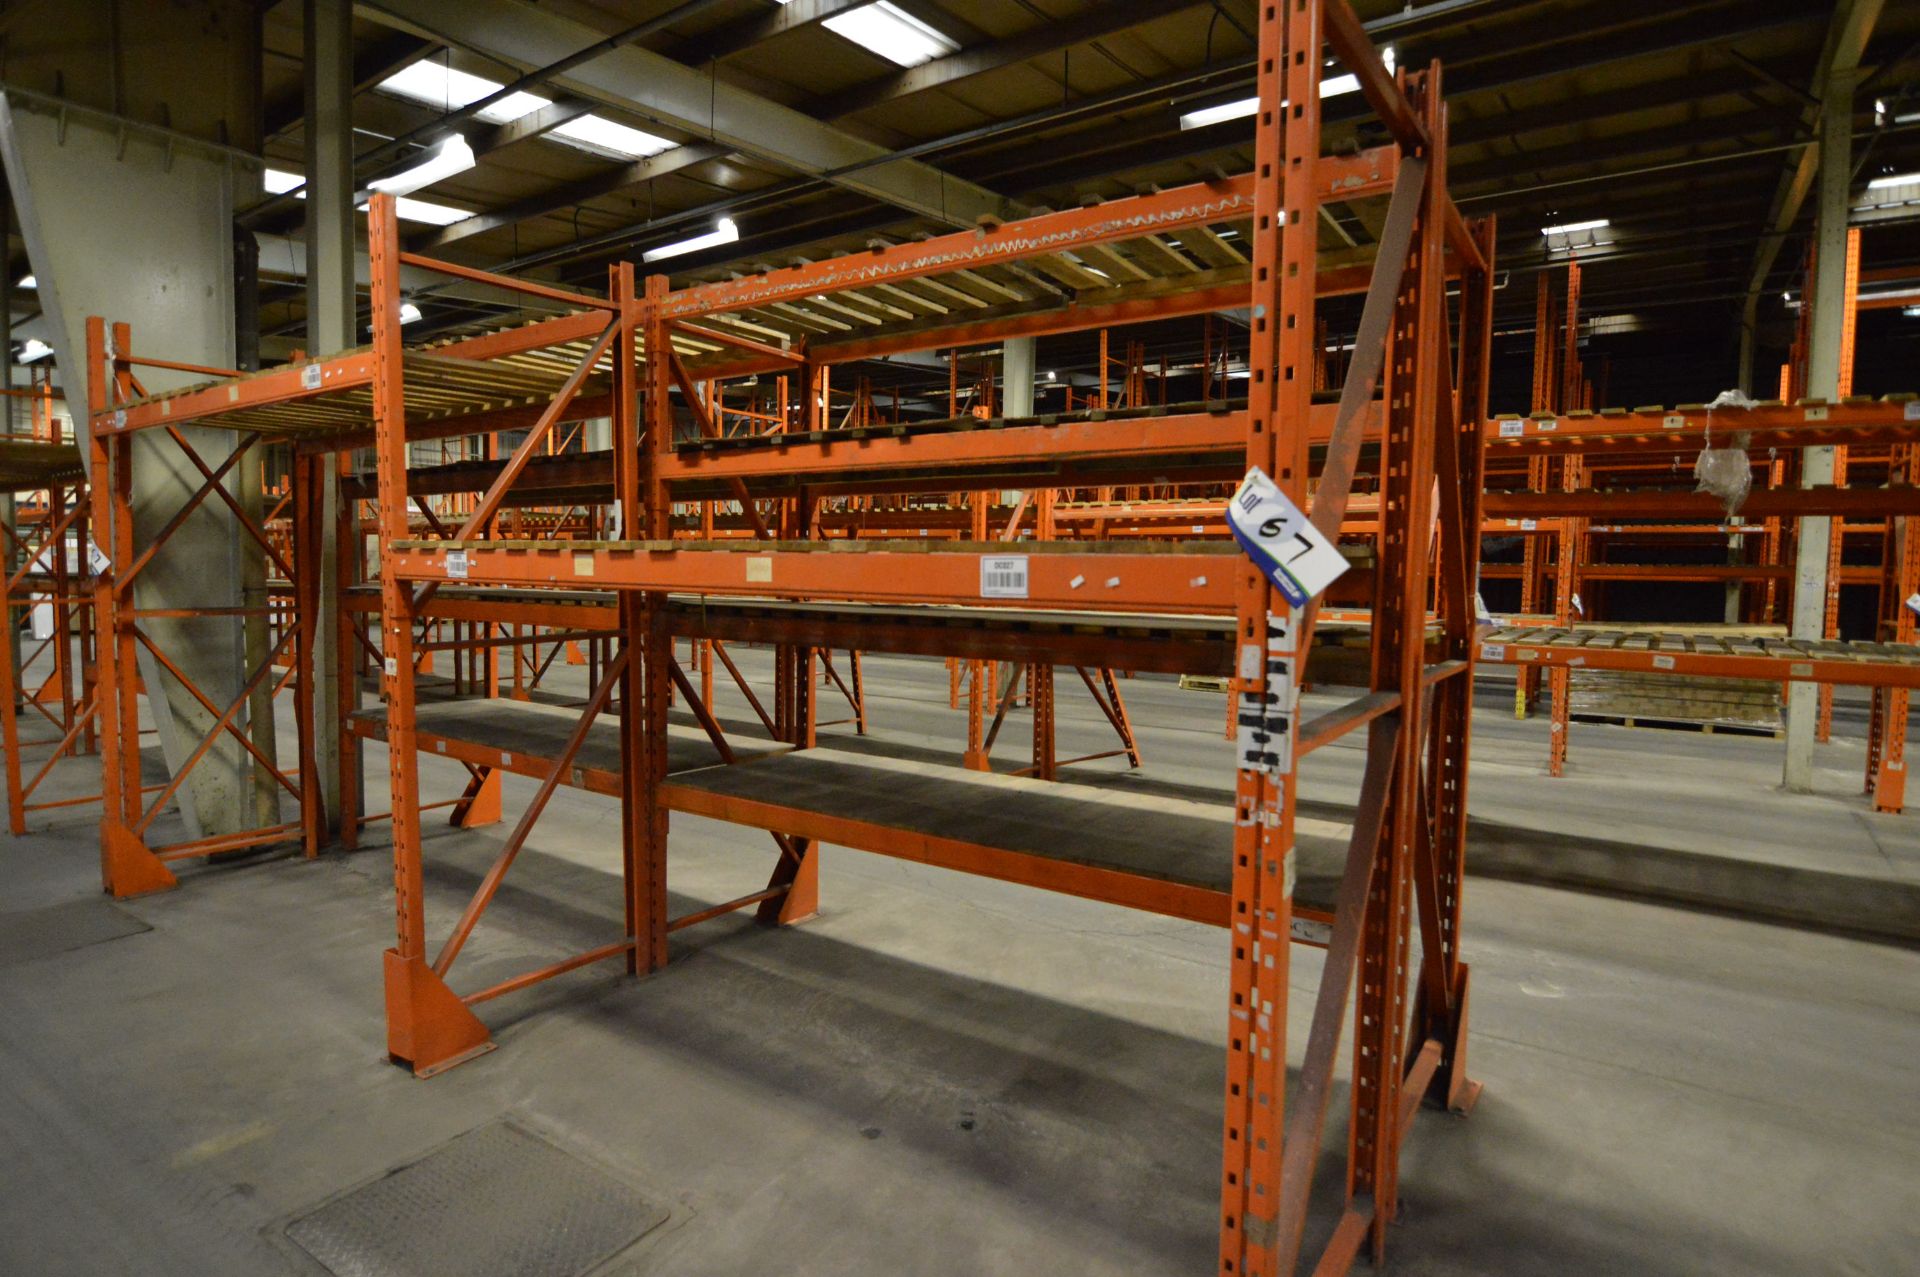 Redirack SD1.70 Single Sided Two Bay Single Tier Pallet Rack, approx. 5.5m long x 900mm x 2.7m high,